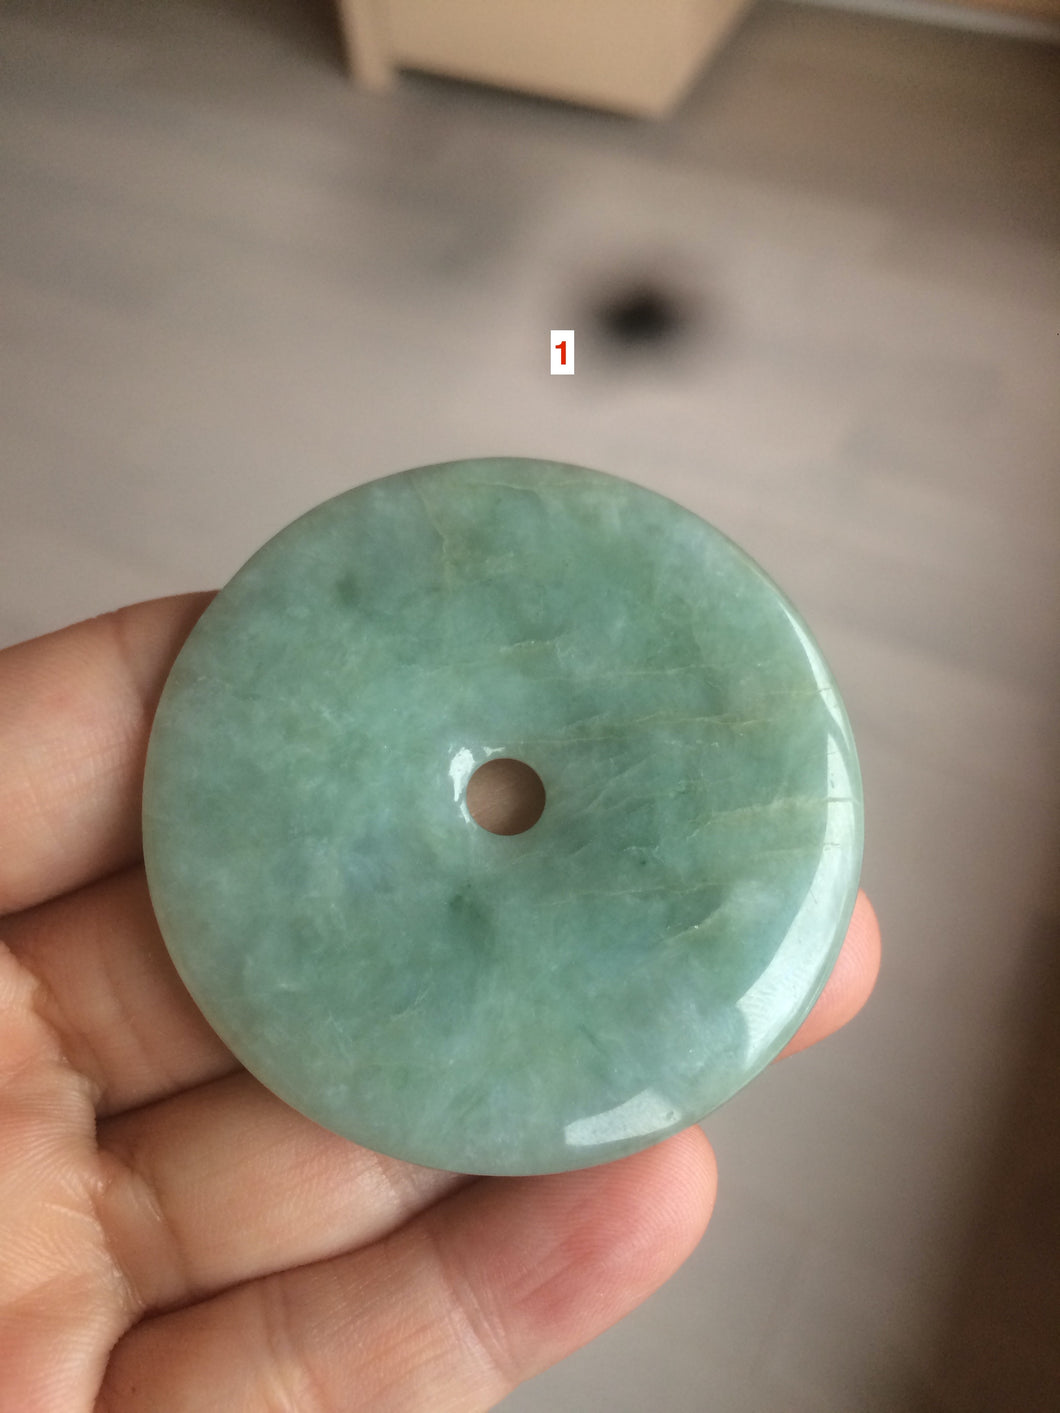 40.5-51mm Type A 100% Natural light green Jadeite Jade Safety Guardian Button donut Pendant/worry stone/car hanger group L103 (add on item)